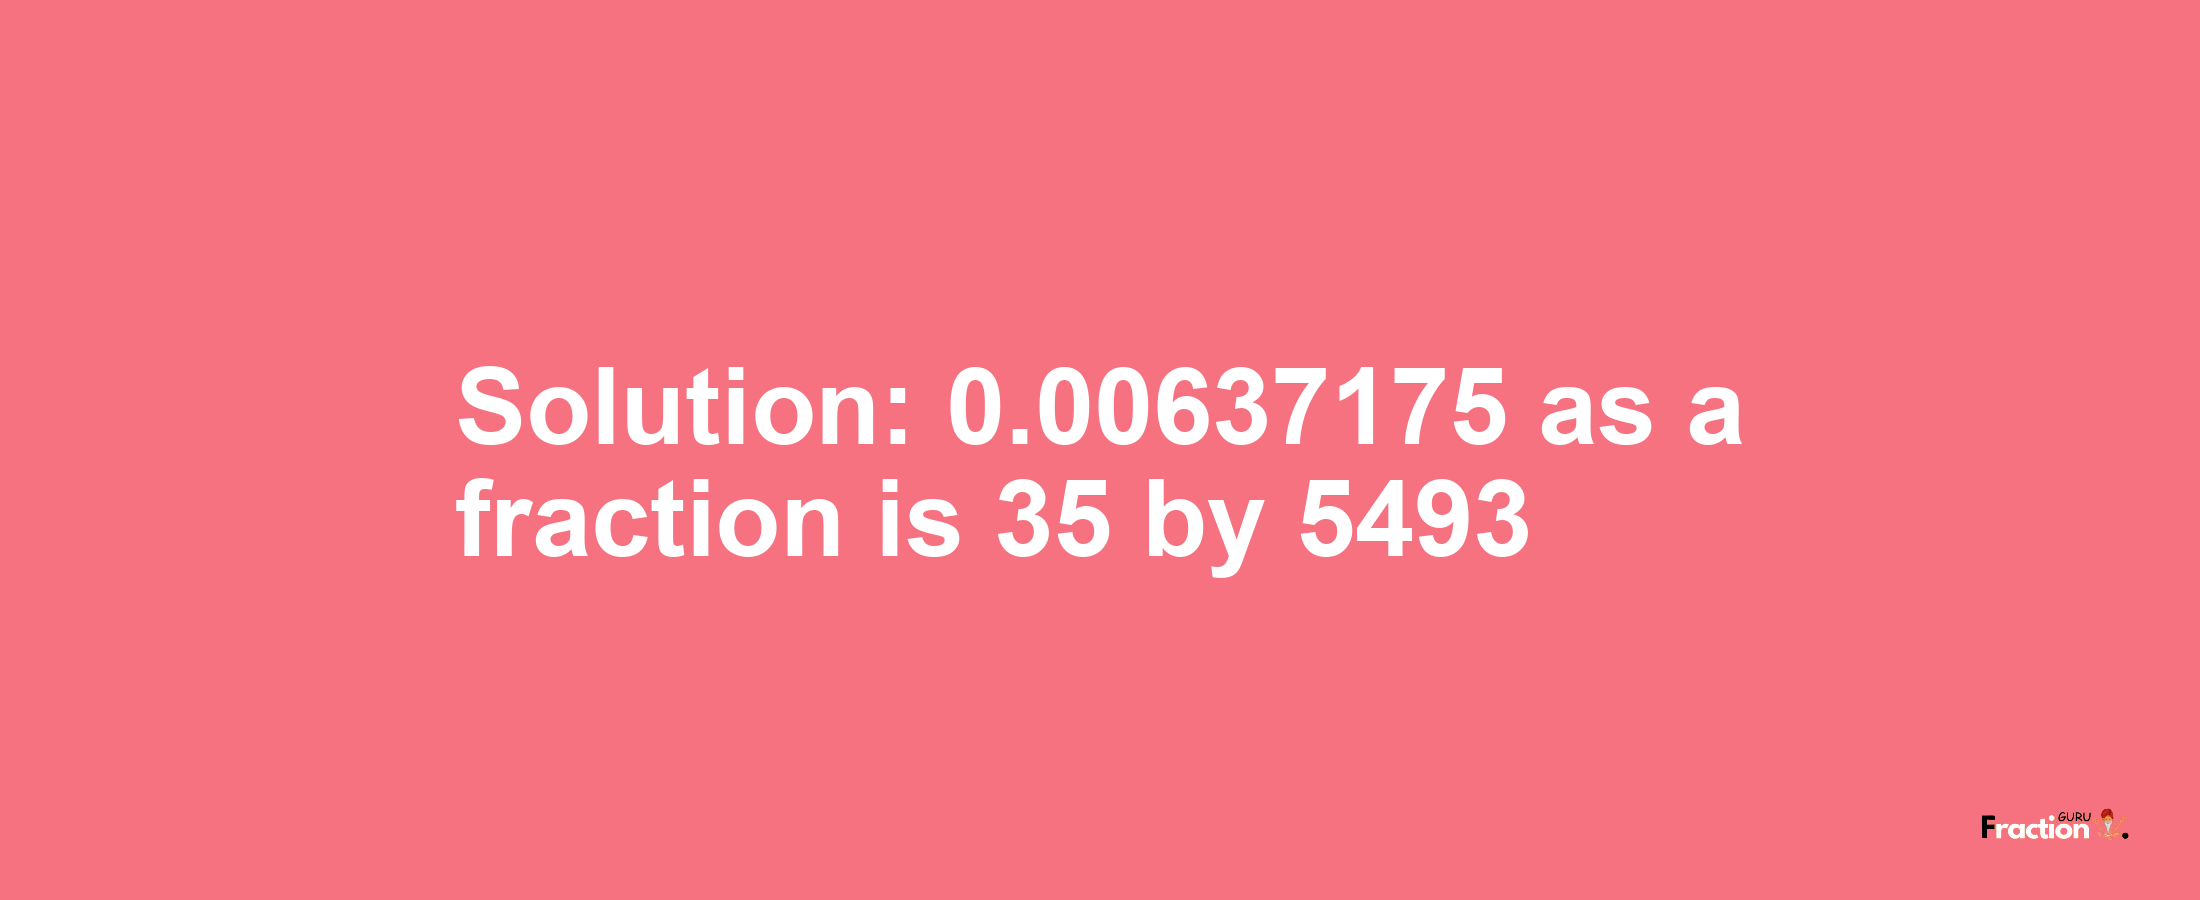 Solution:0.00637175 as a fraction is 35/5493